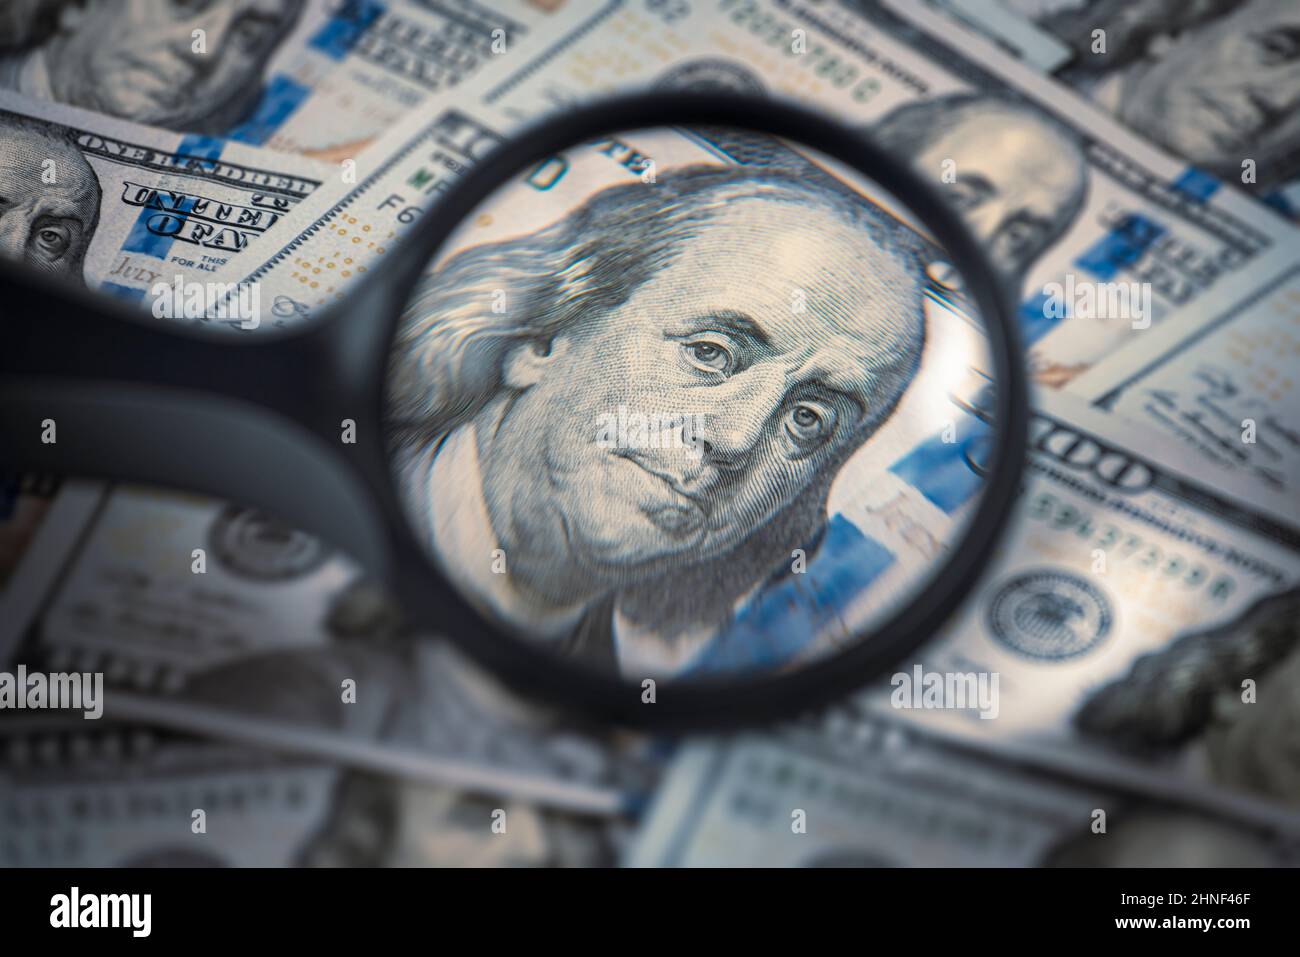 Сlose-up portrait of Benjamin Franklin in a magnifying glass, One hundred dollar bills, finance and capital banking concept Stock Photo